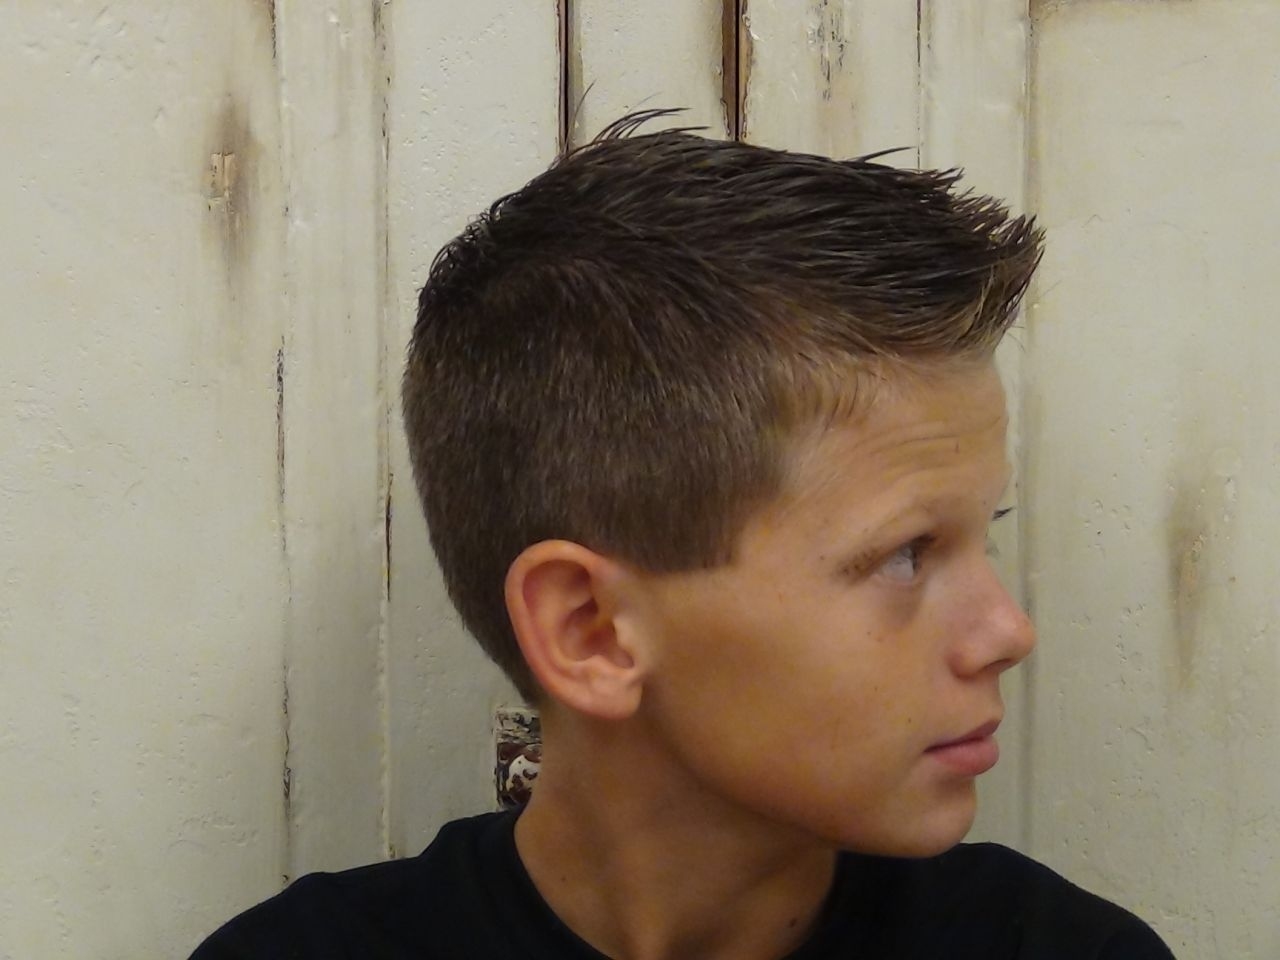 Pin On Hair pertaining to Haircut Styles For 13 Year Old Boys